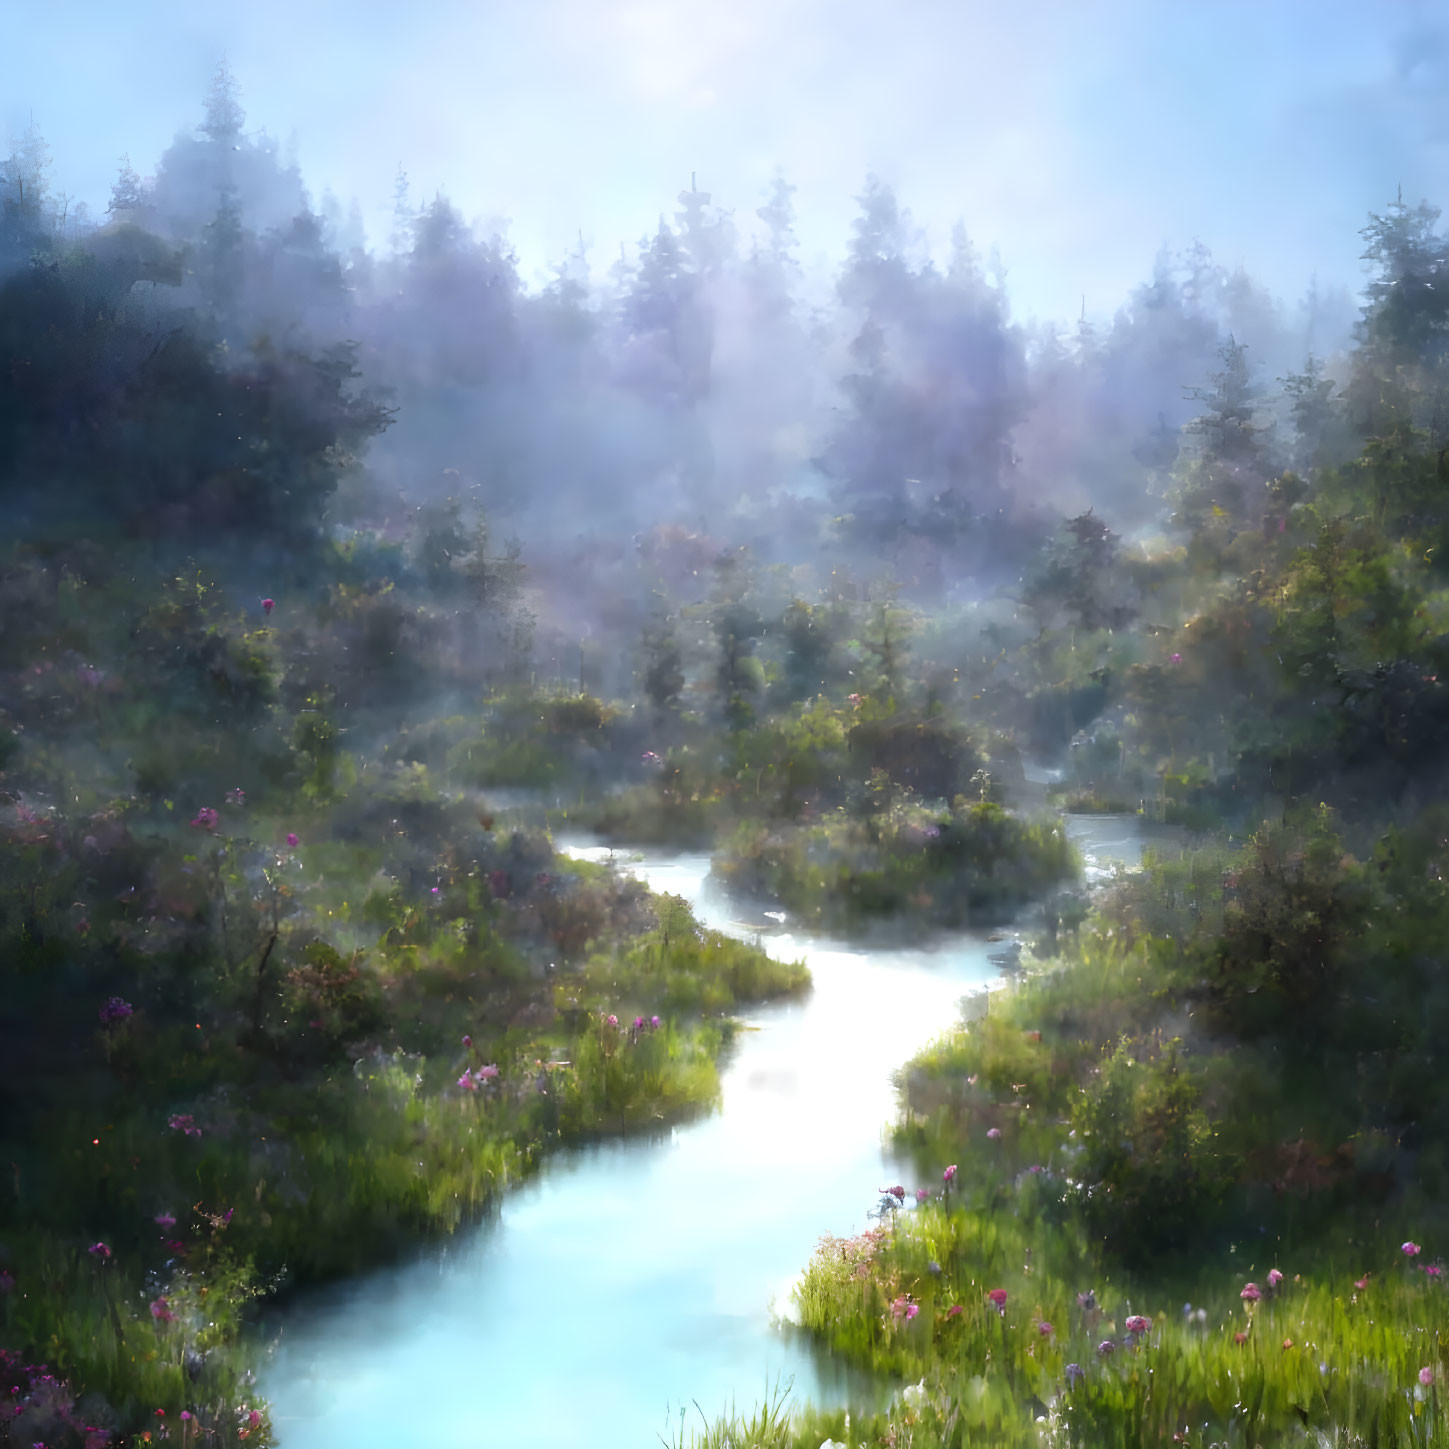 Tranquil misty landscape with stream, greenery, and pink flowers